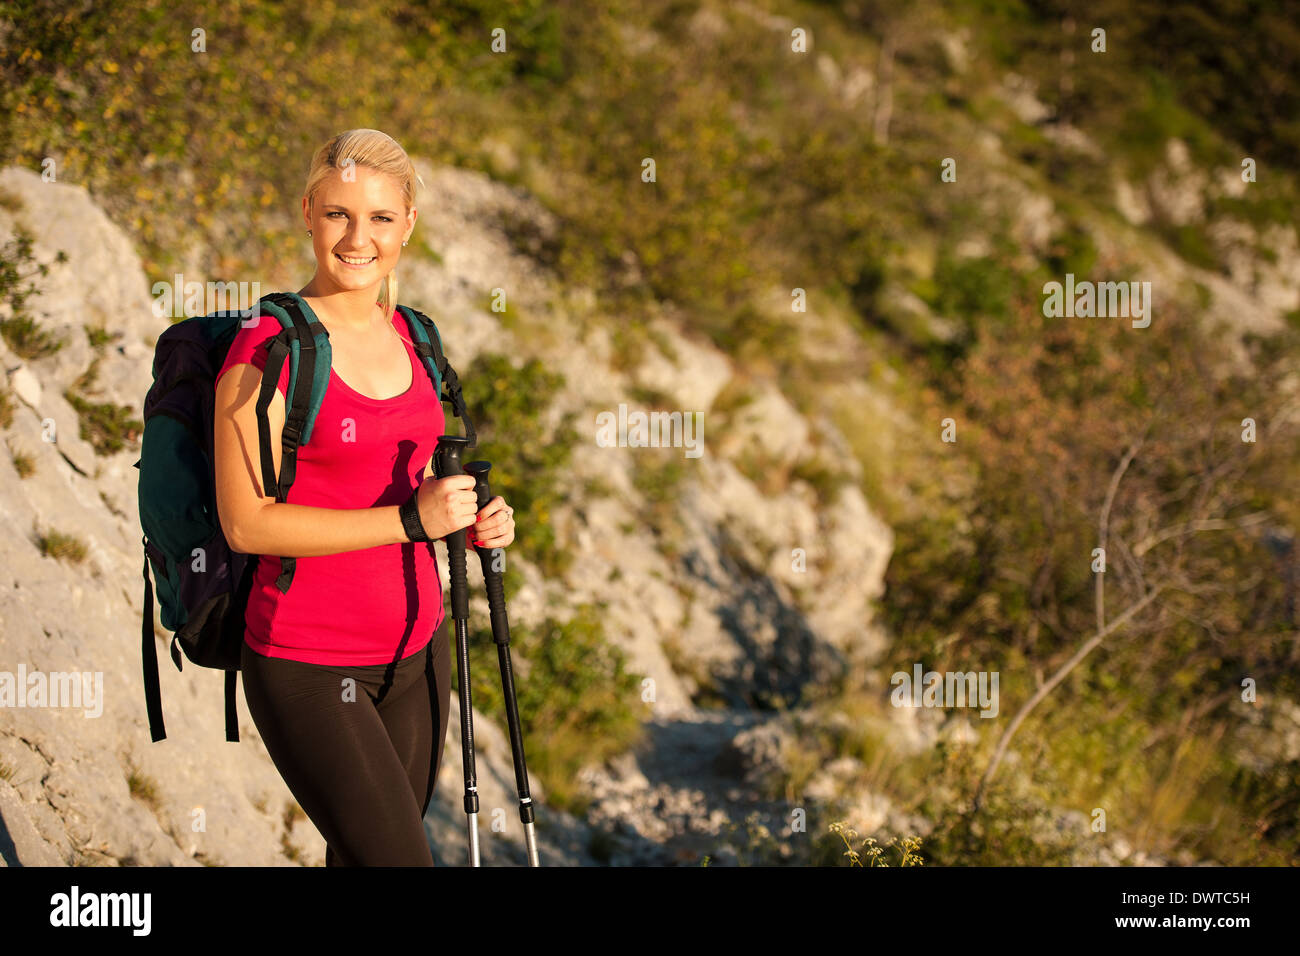 95,000+ Woman Hiking Pictures